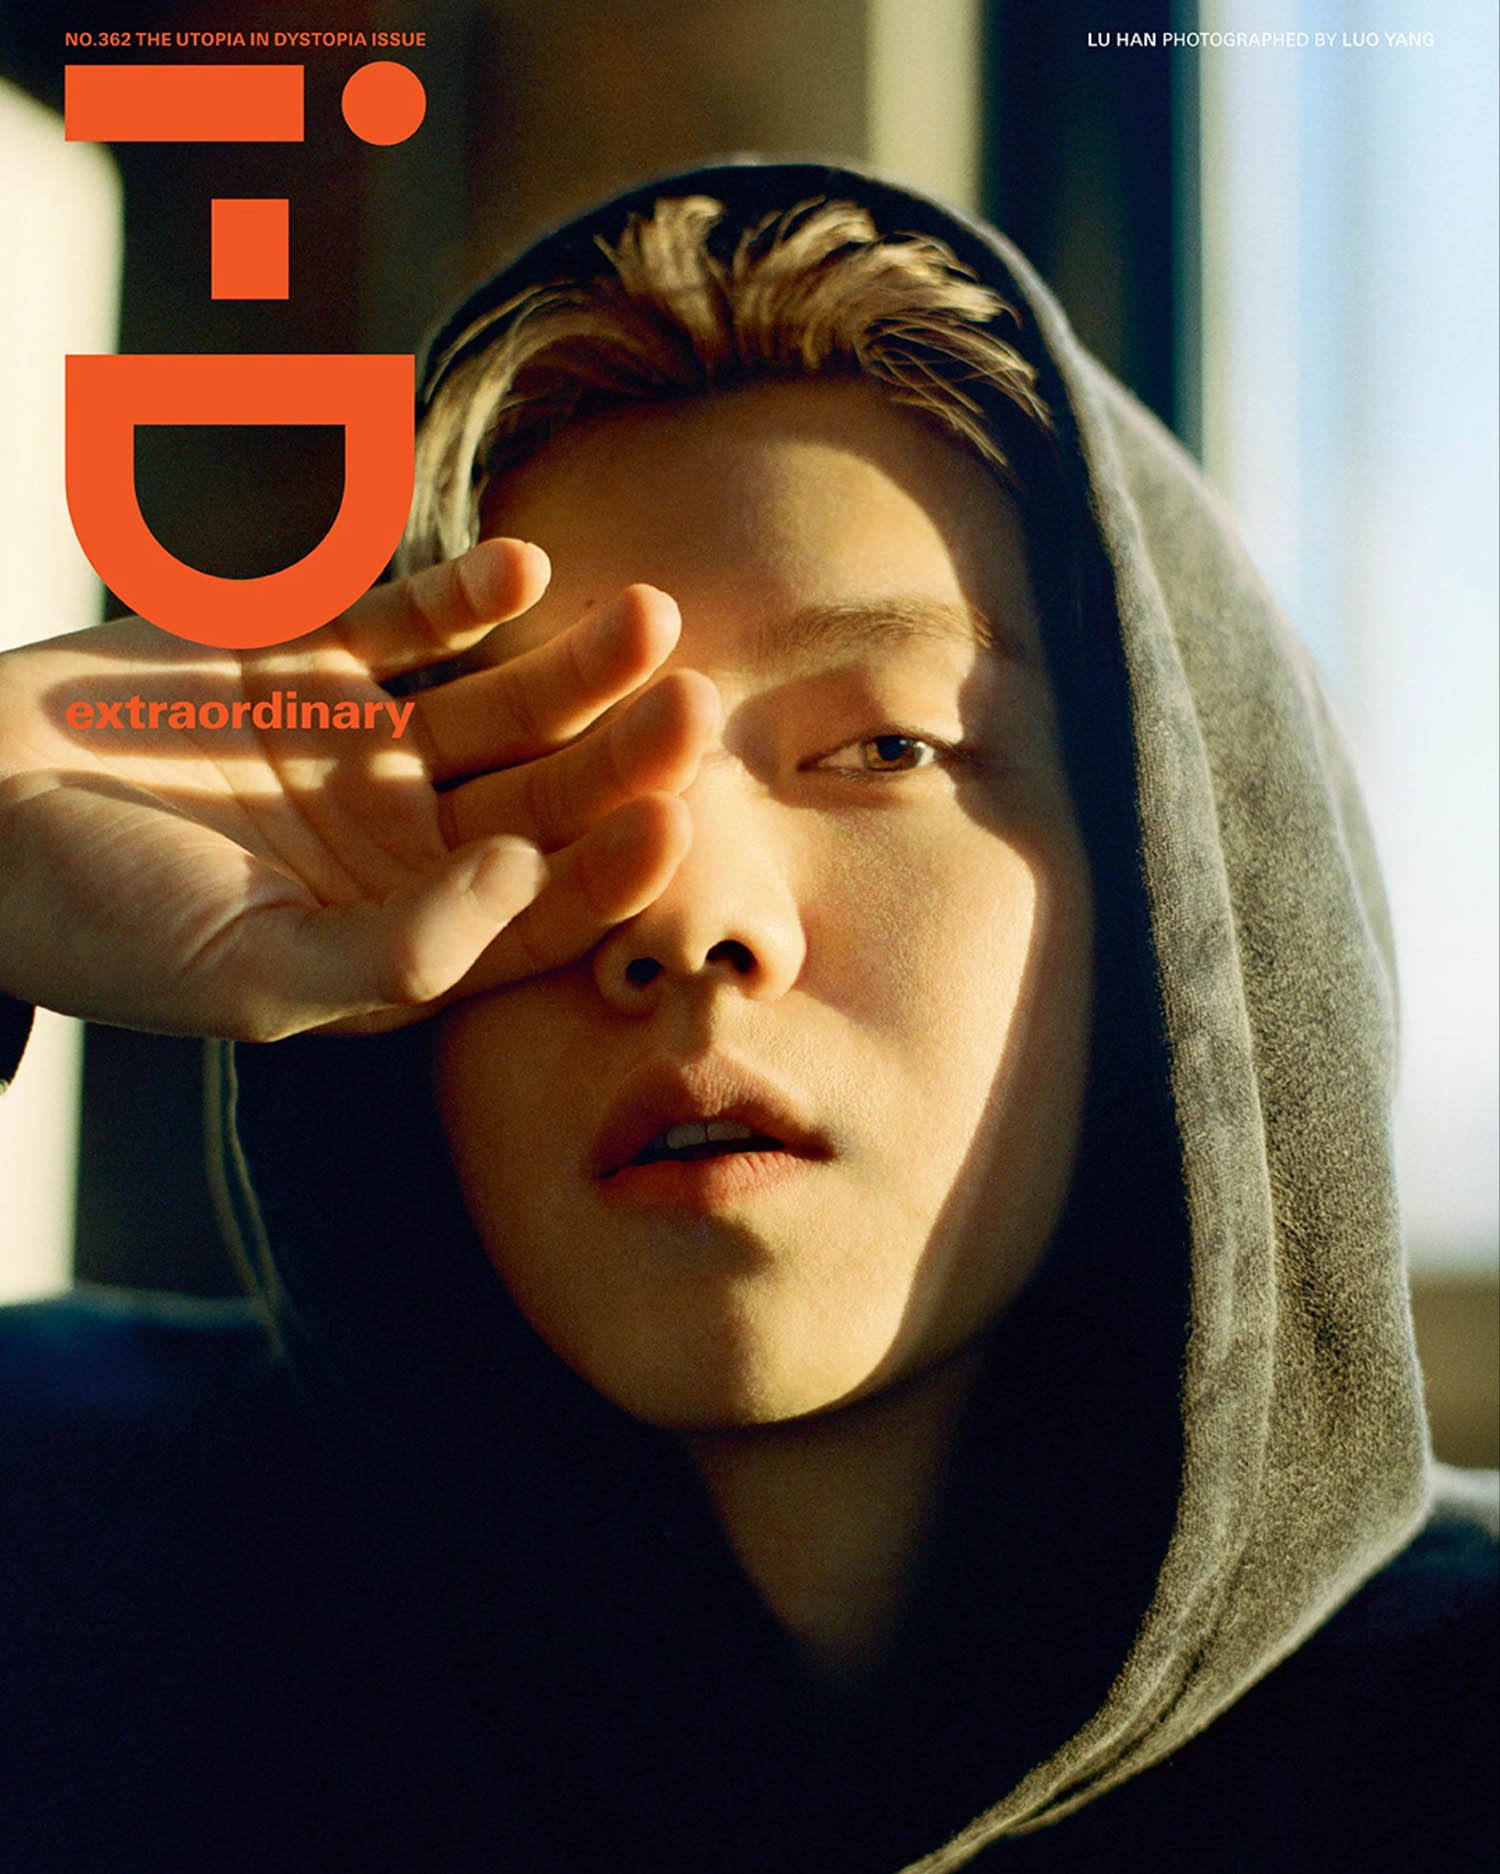 Luhan covers i-D Magazine Issue 362 by Luo Yang